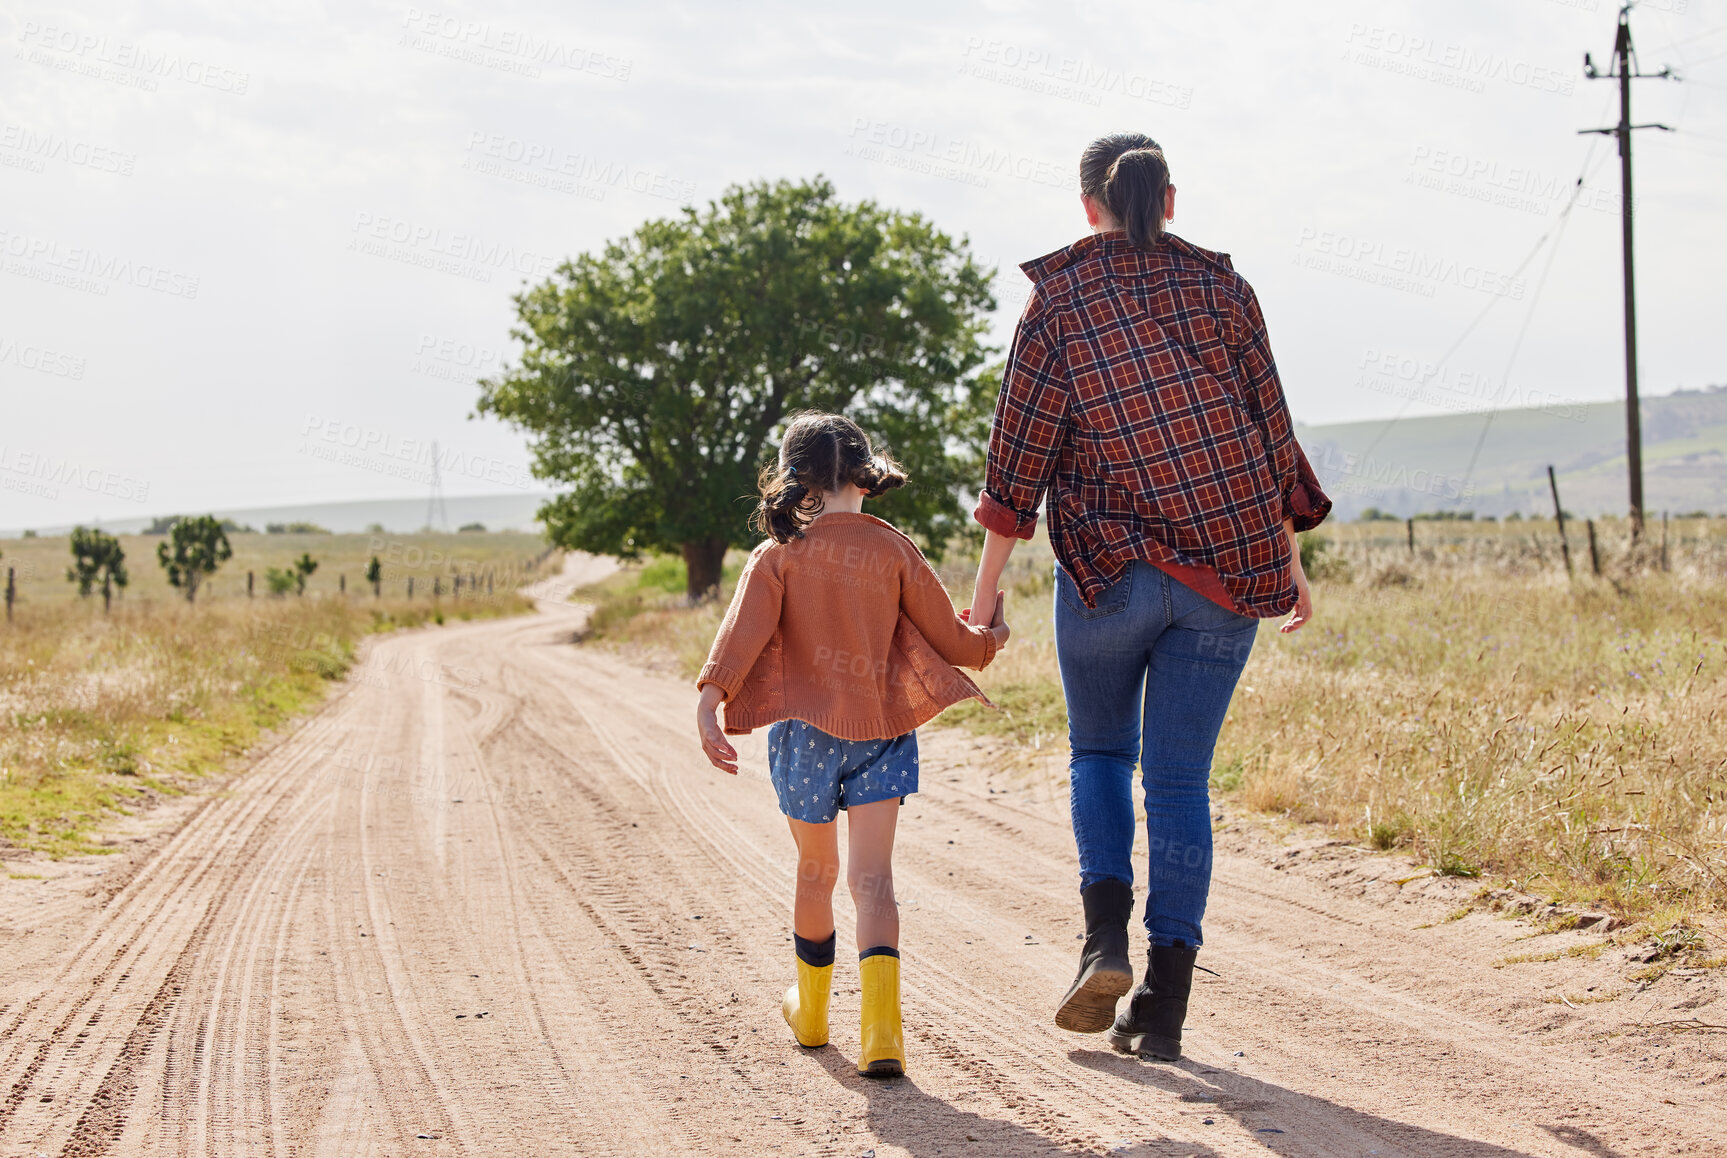 Buy stock photo Rearview shot of a little girl holding her mother's hand while walking on a farm